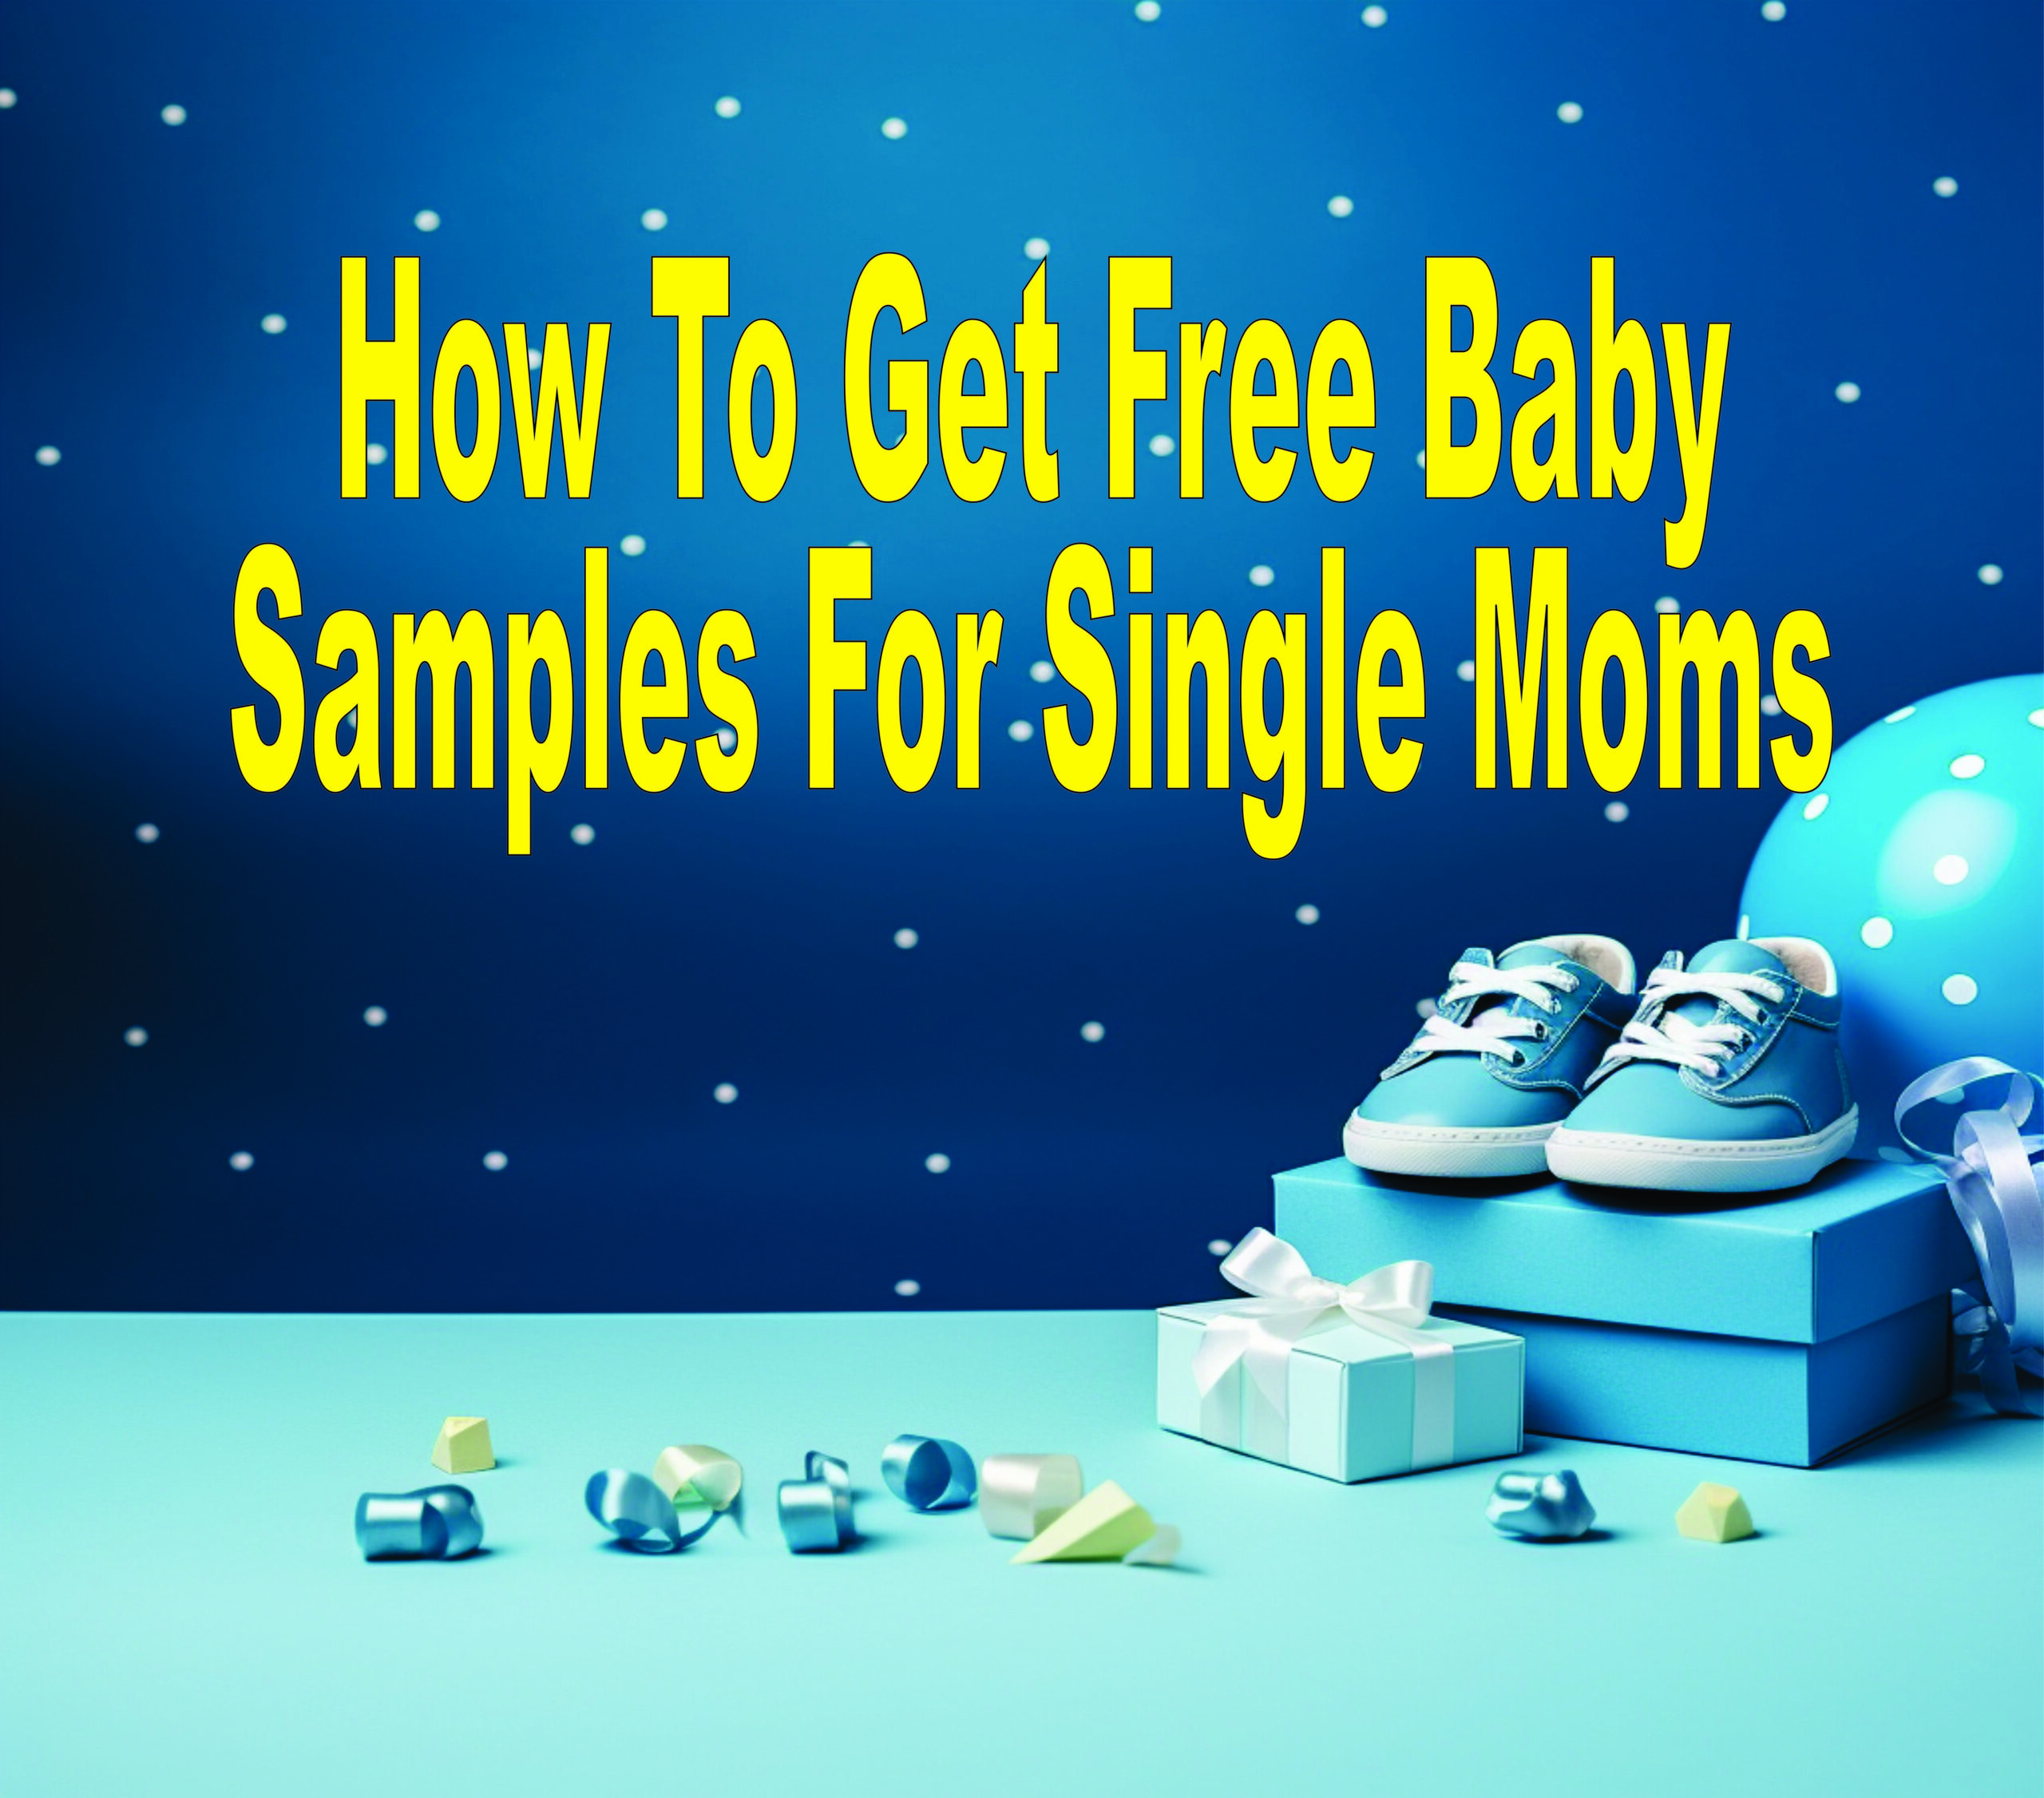 How To Get Free Baby Samples For Single Moms